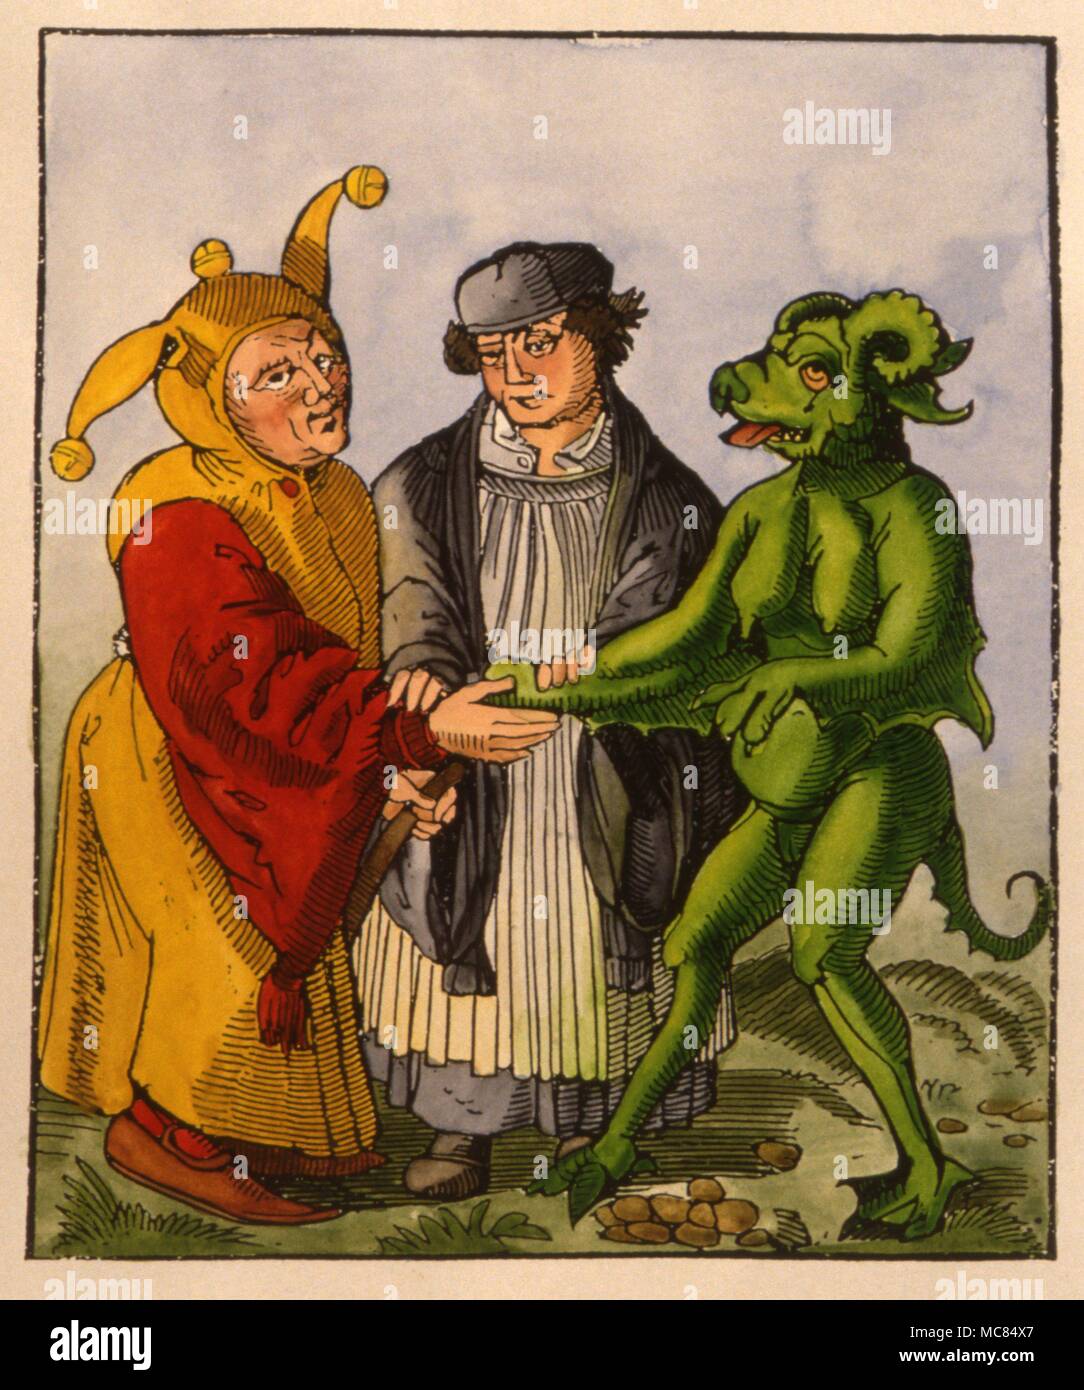 Print of circa 1500, depicting in satirical terms the union of Churchman, Devil and Fool. The print is anonymous, but is sometimes linked with Durer. Stock Photo